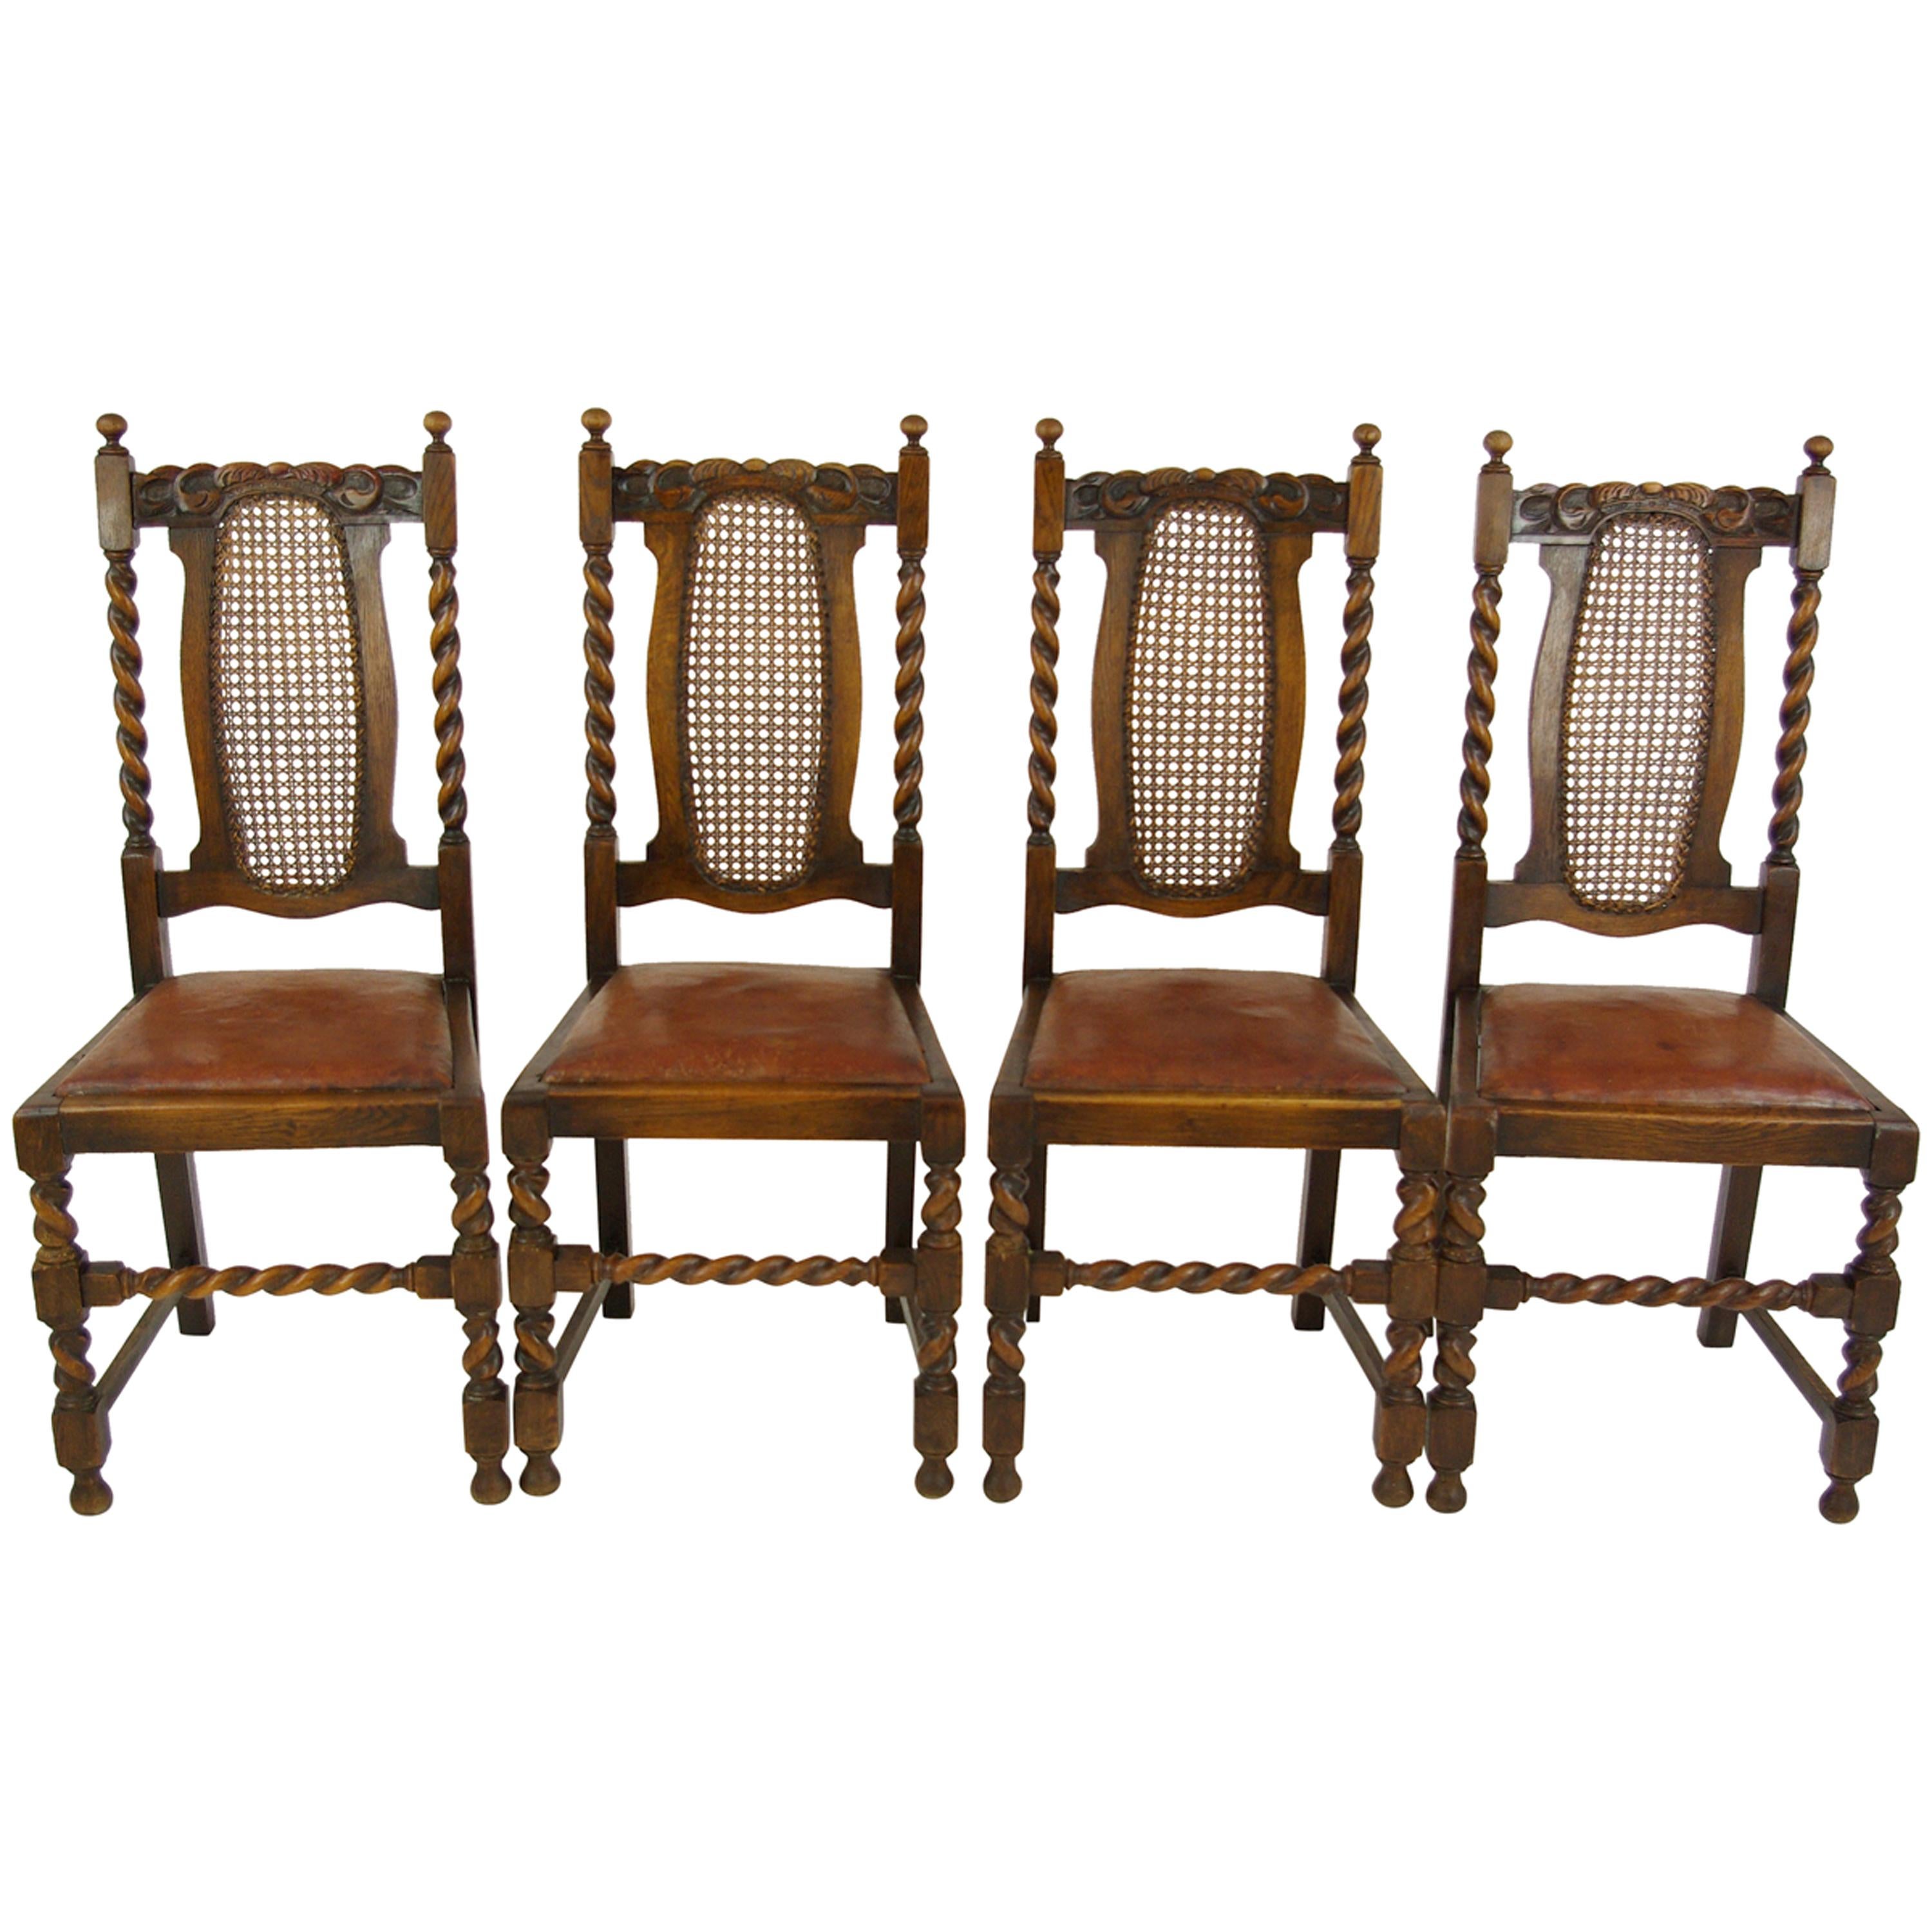 4 Antique Dining Chairs, Barley Twist Chairs, Oak Dining Chairs, 1920